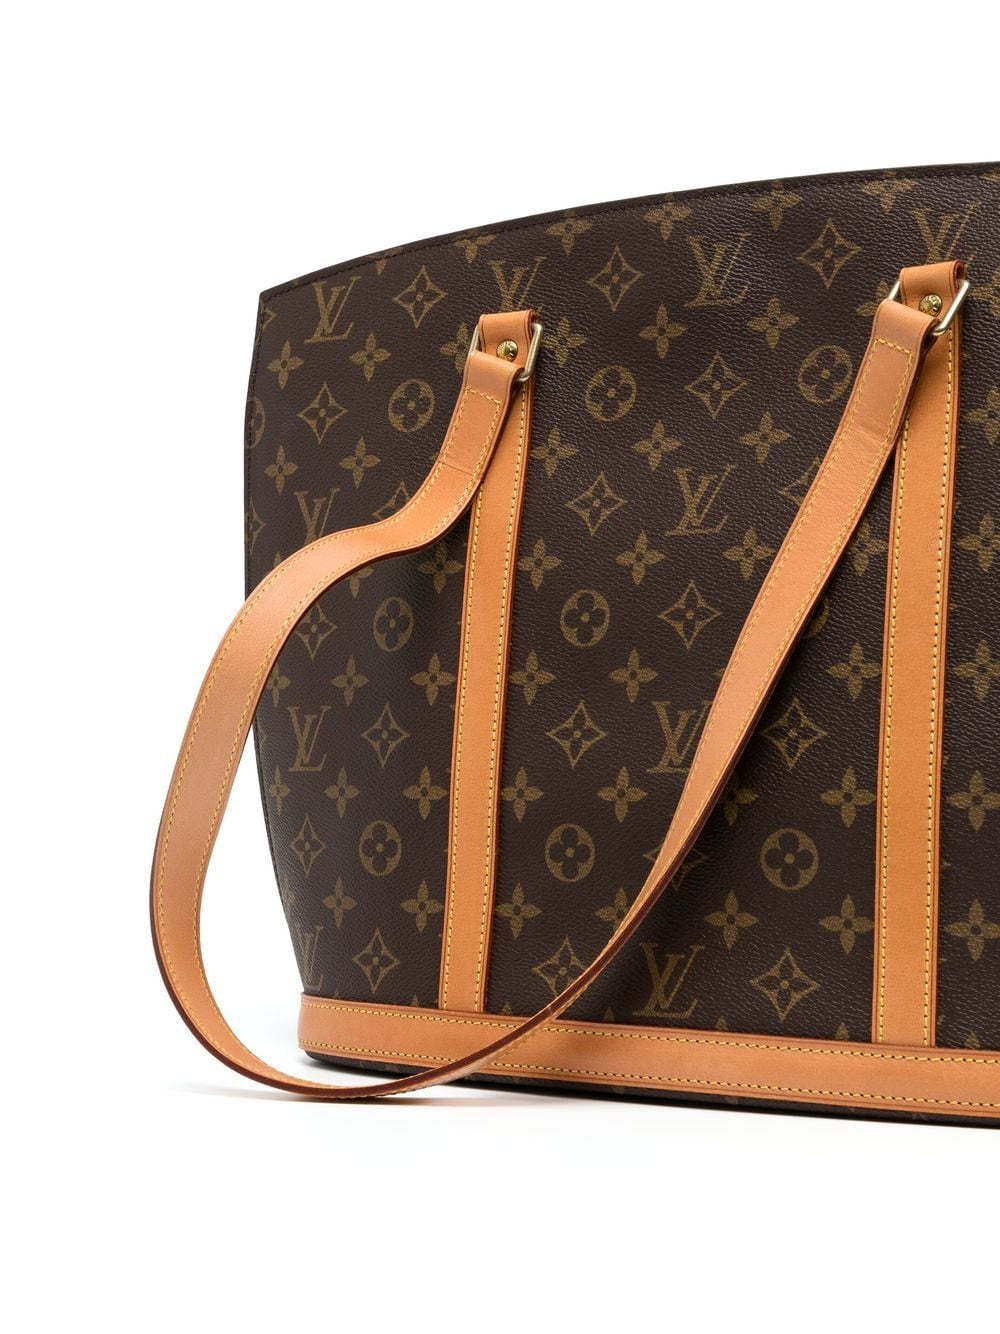 Louis Vuitton 1997 Pre-owned Monogram Babylone Tote